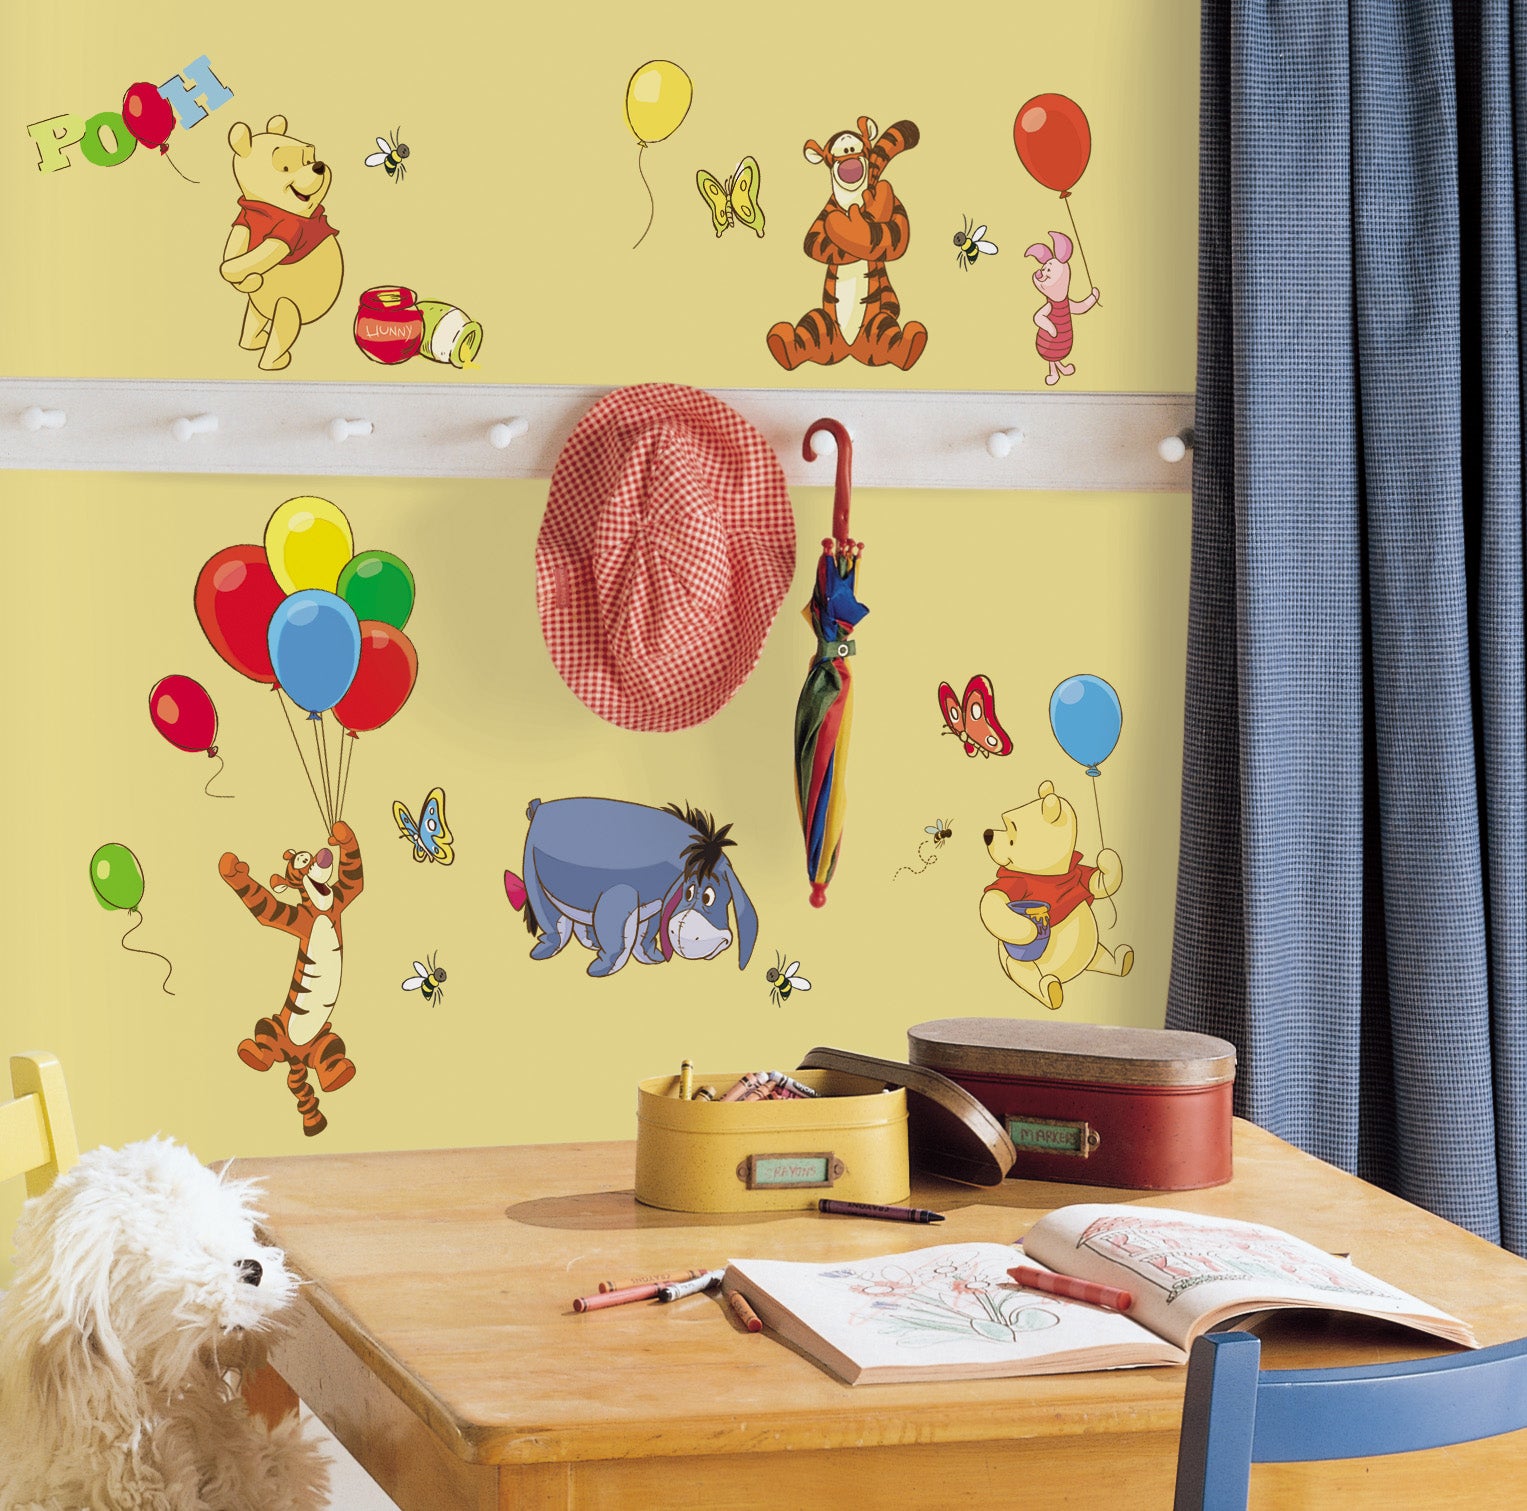 Roommates Pooh and Friends Peel and Stick Wall Decal